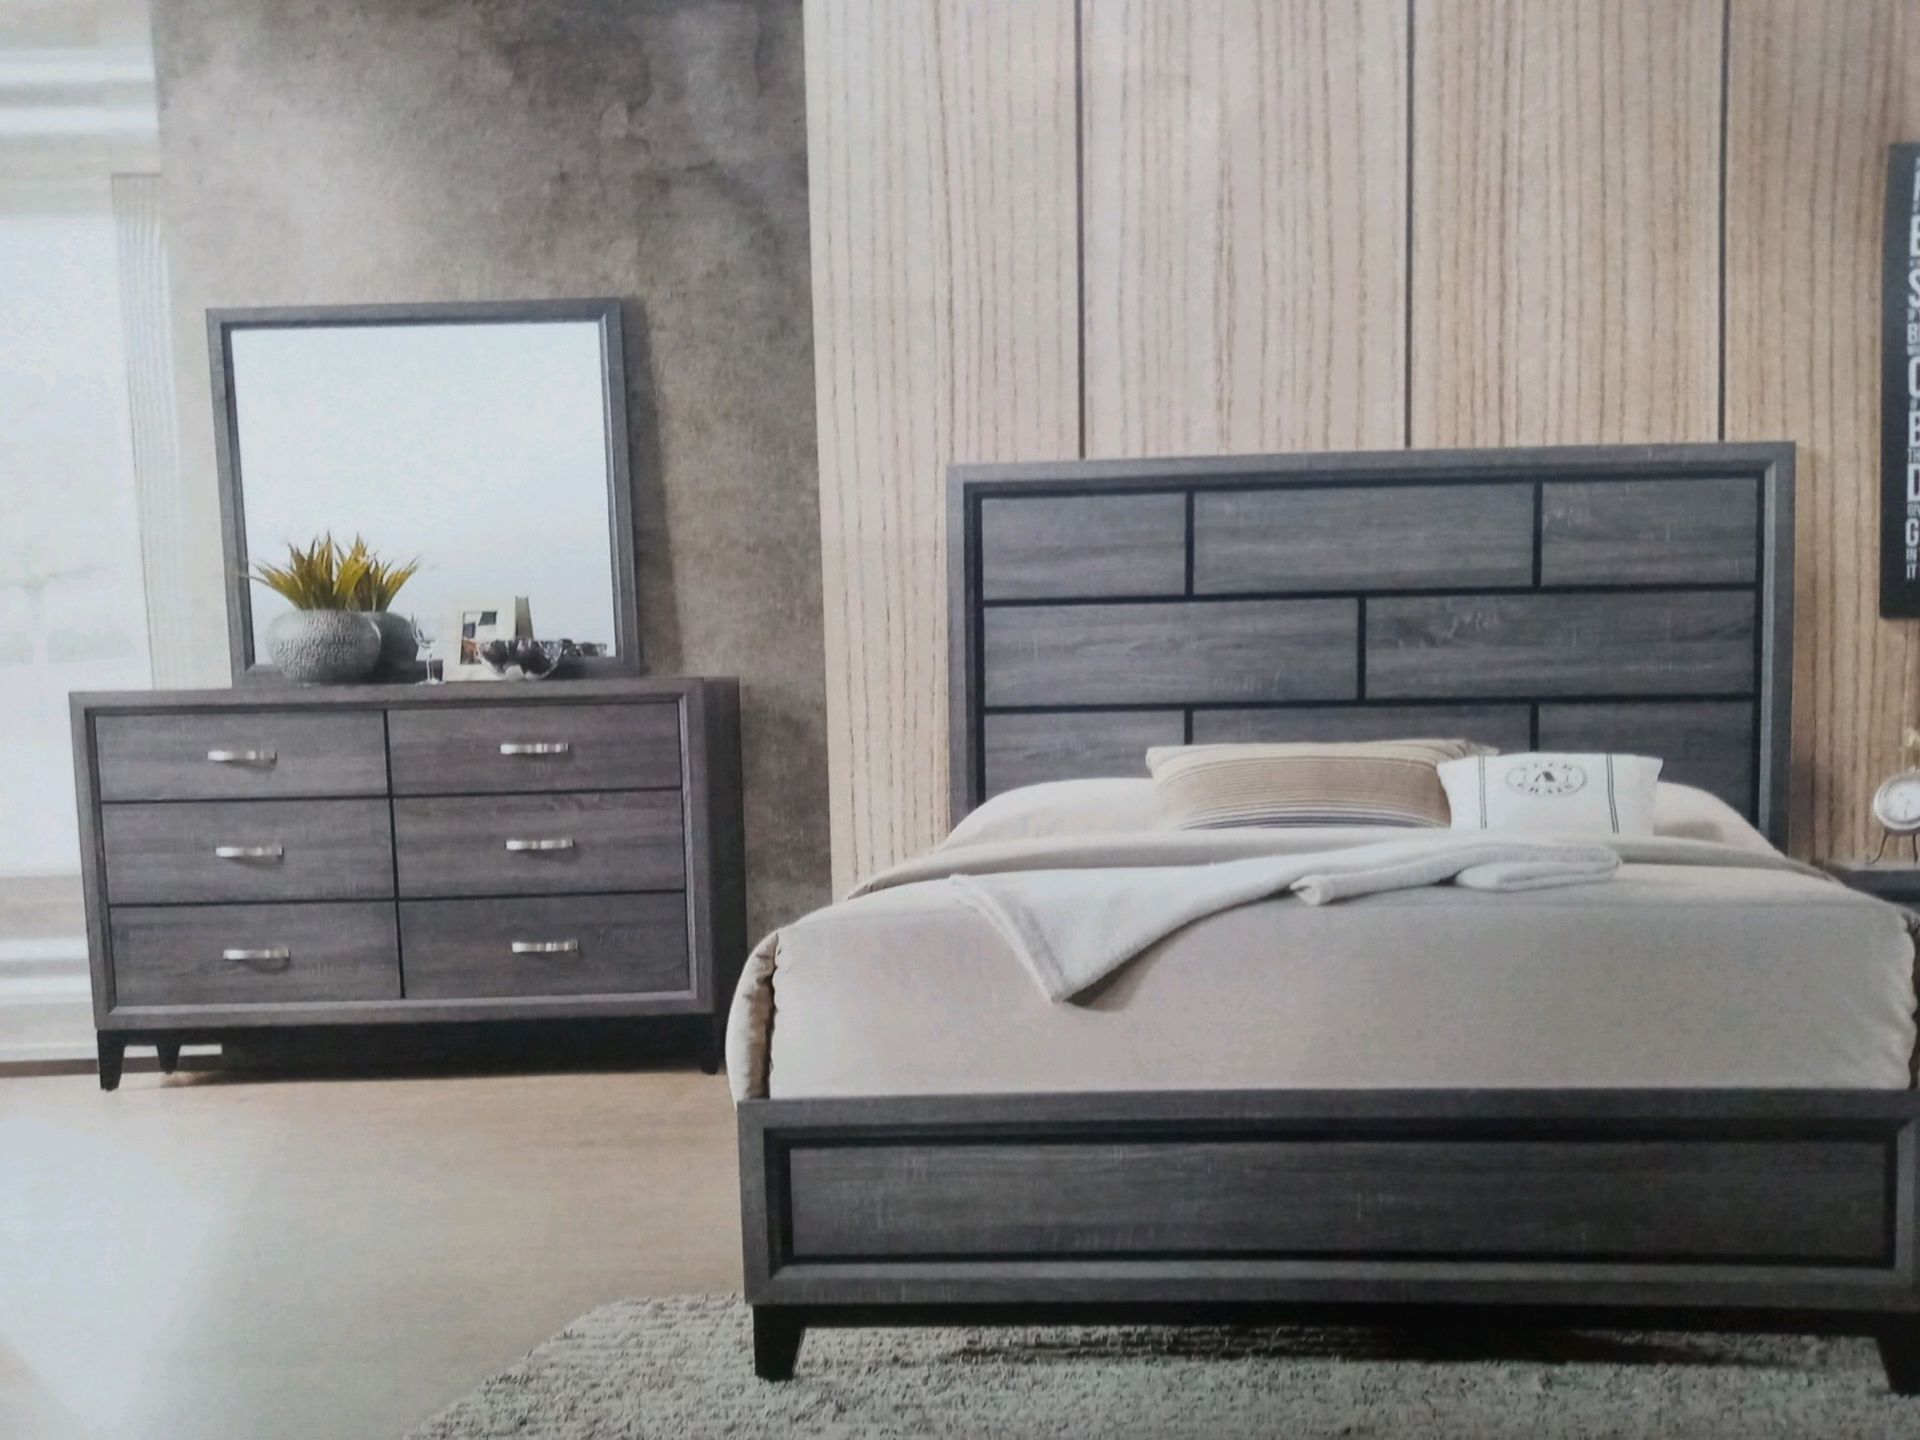 Brand New Queen Size Bedroom Set$799.financing Available No Credit Needed 